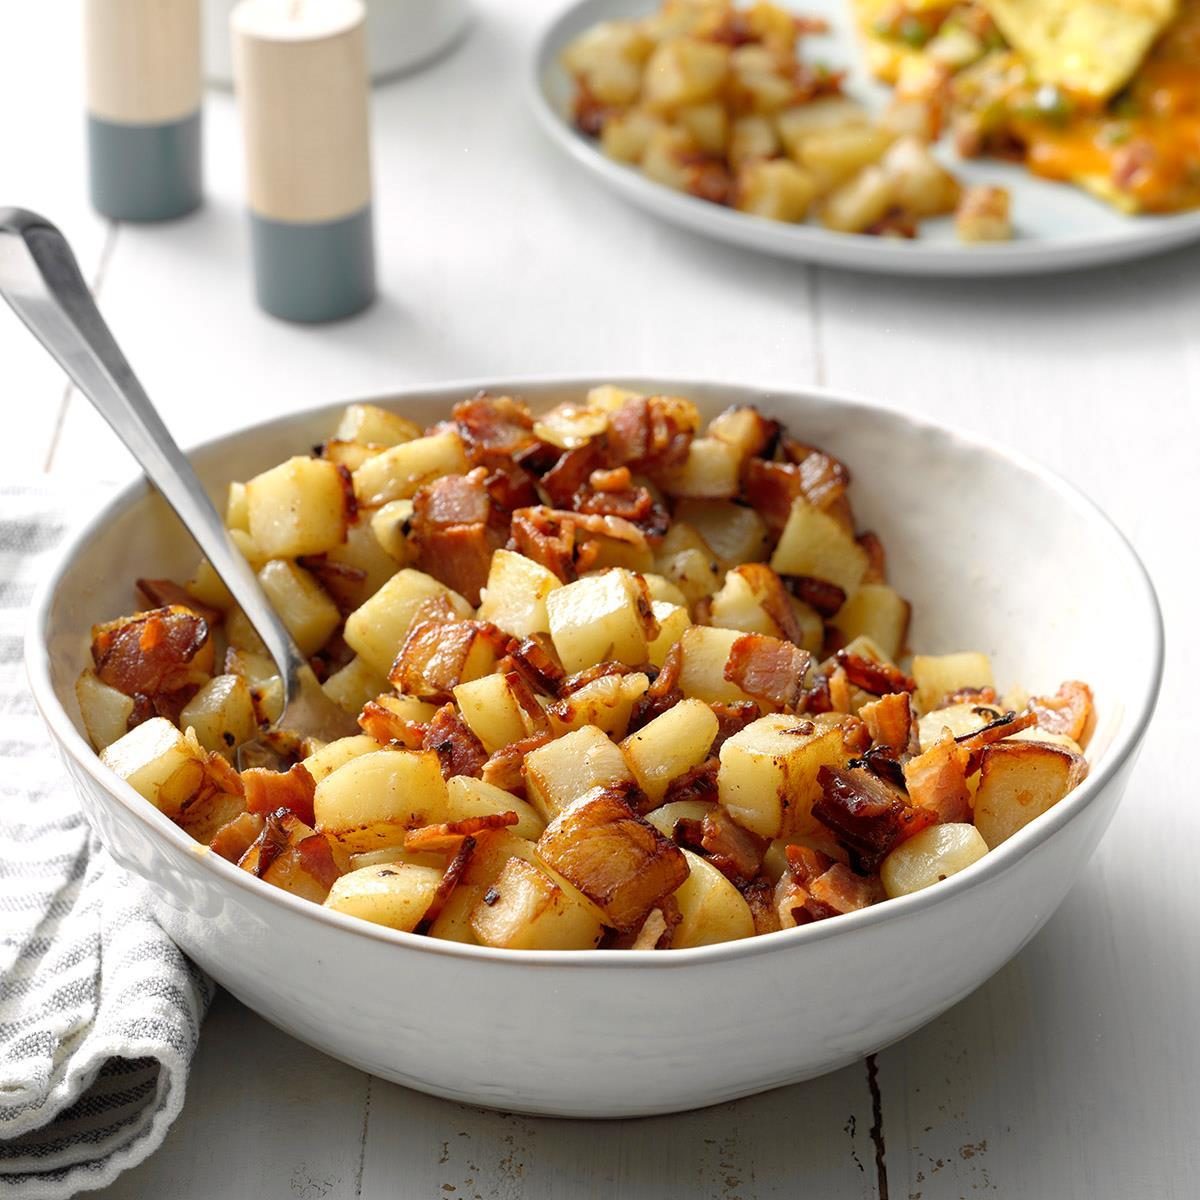 Home fries with bacon